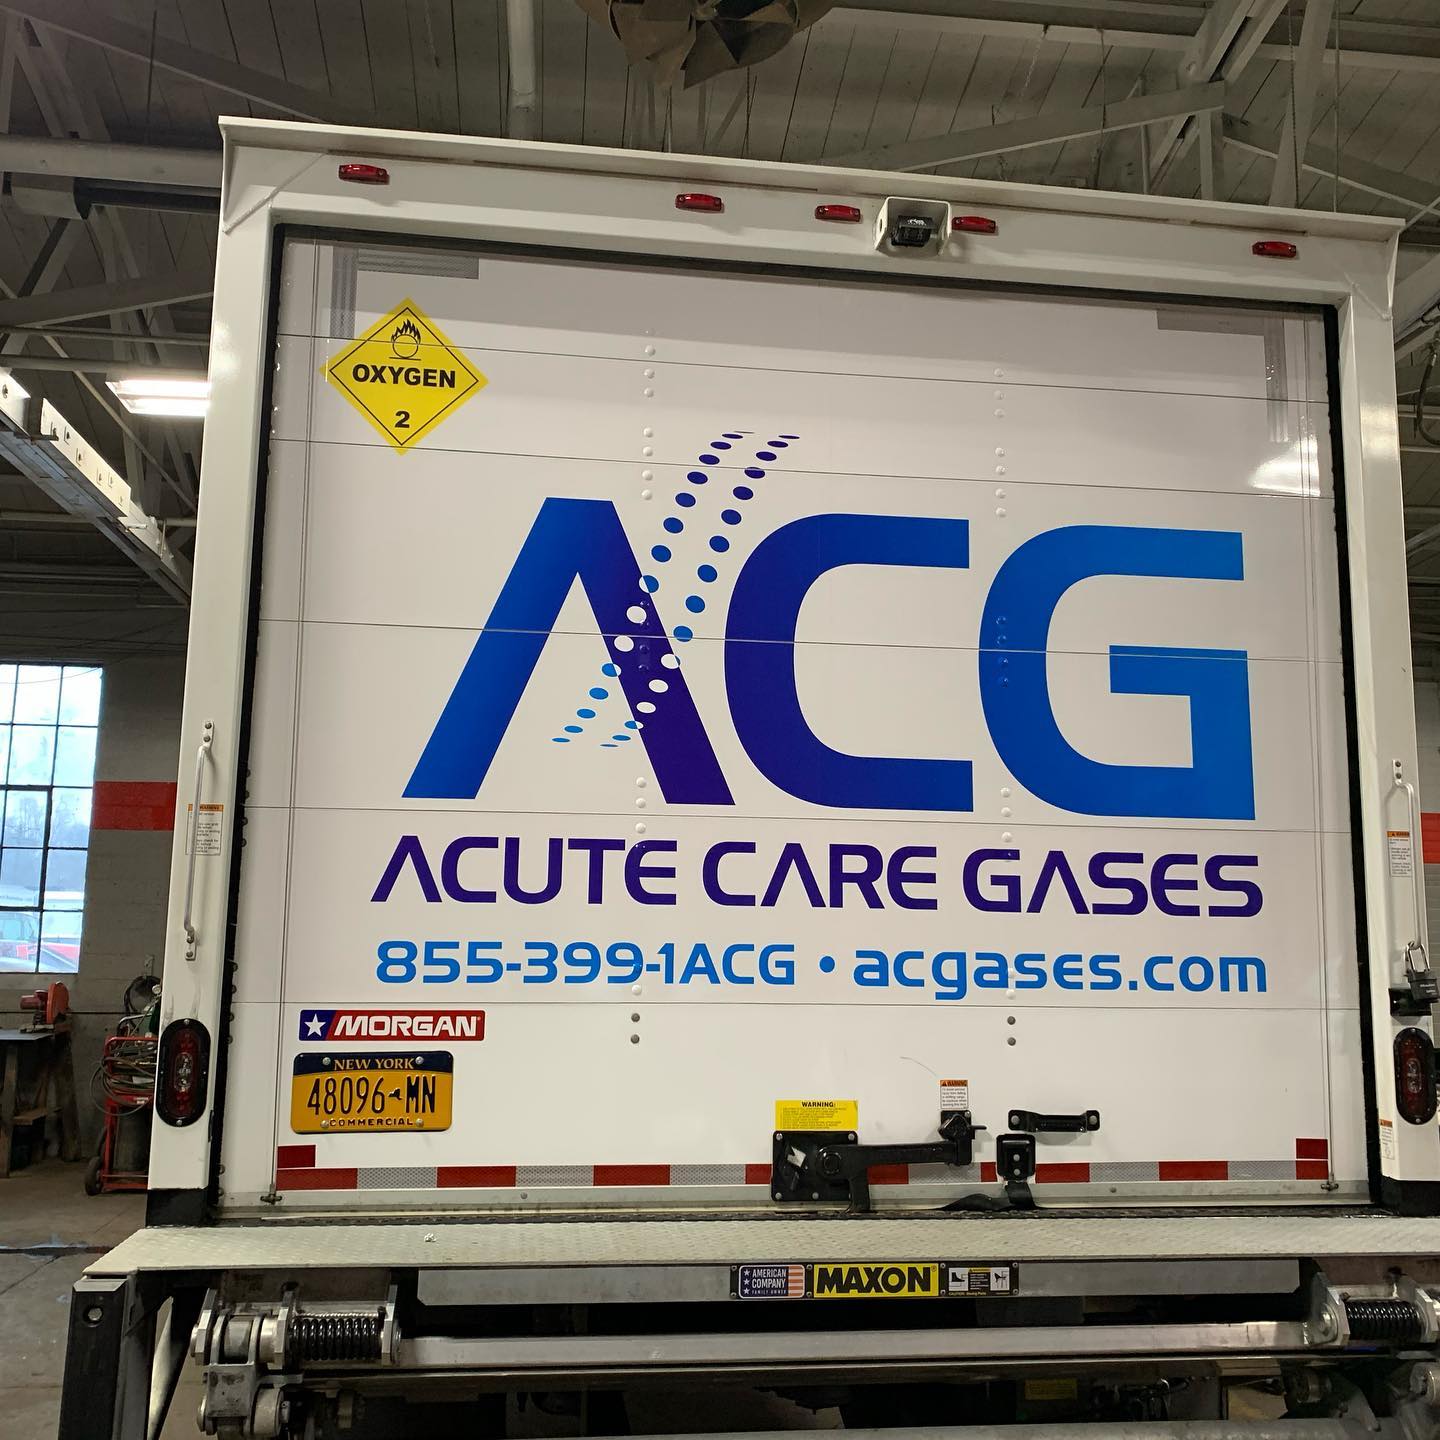 Acute Care Gas Ryder Truck Rental and Leasin